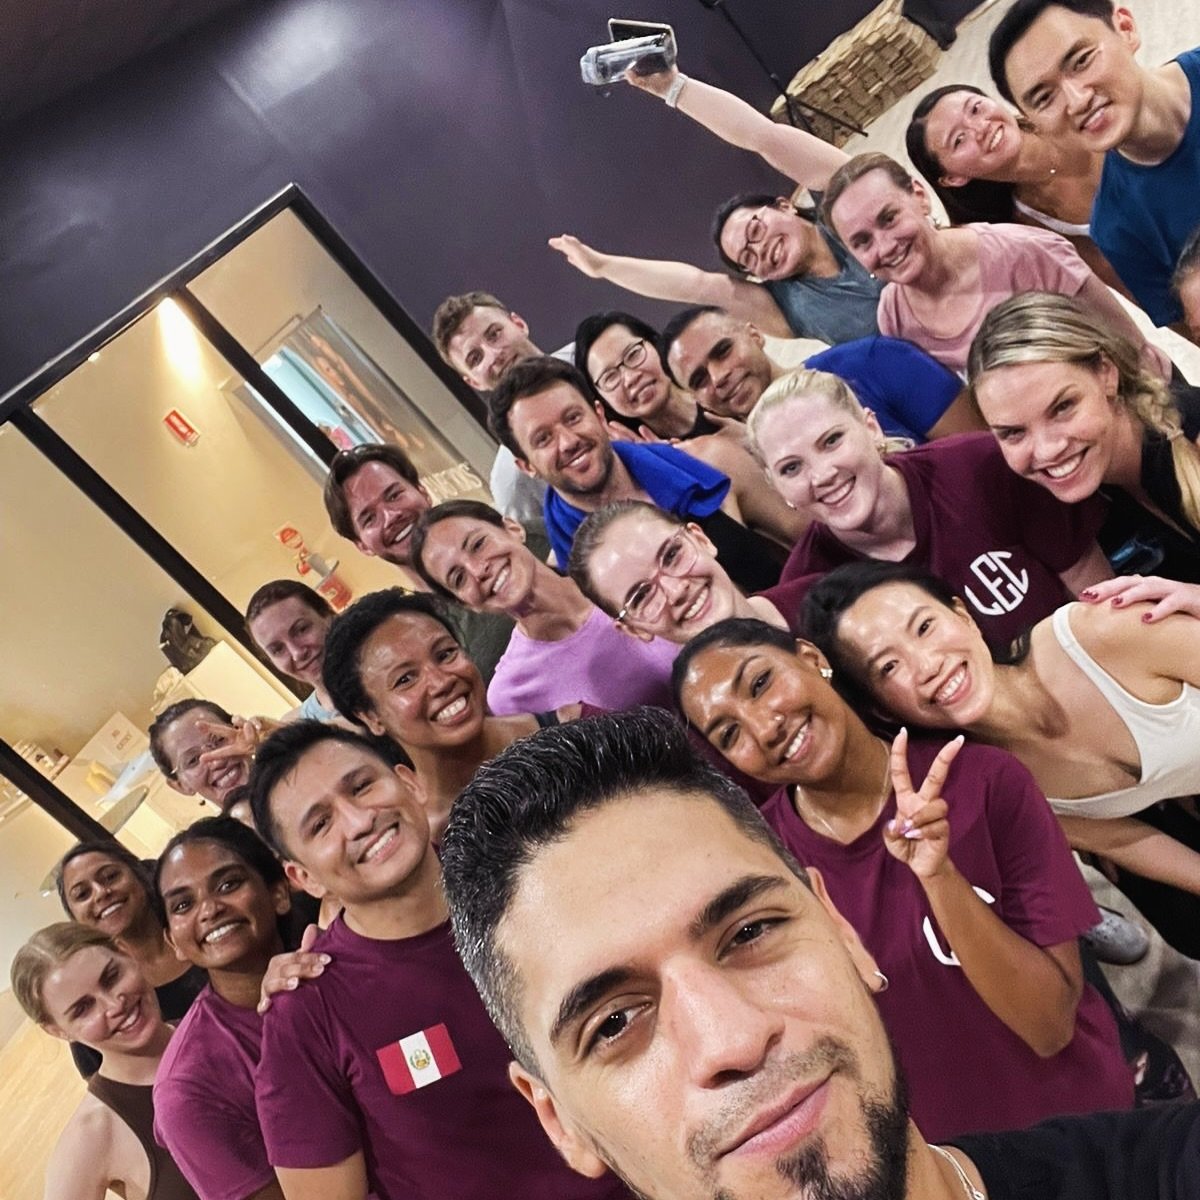 Familia 🥰 We&rsquo;re not just here for the dance classes! We just actually like spending time with each other too!

#danceschool #dancefam #familia #selfie #lec